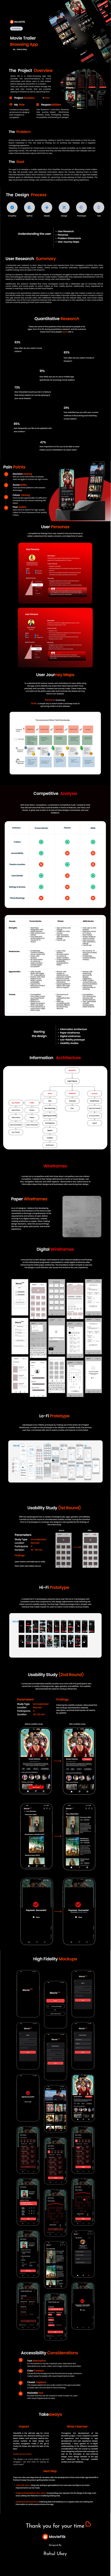 UX design Case Study UX Research UI/UX Figma Mobile app user experience lowfidelity highfidelity prototype